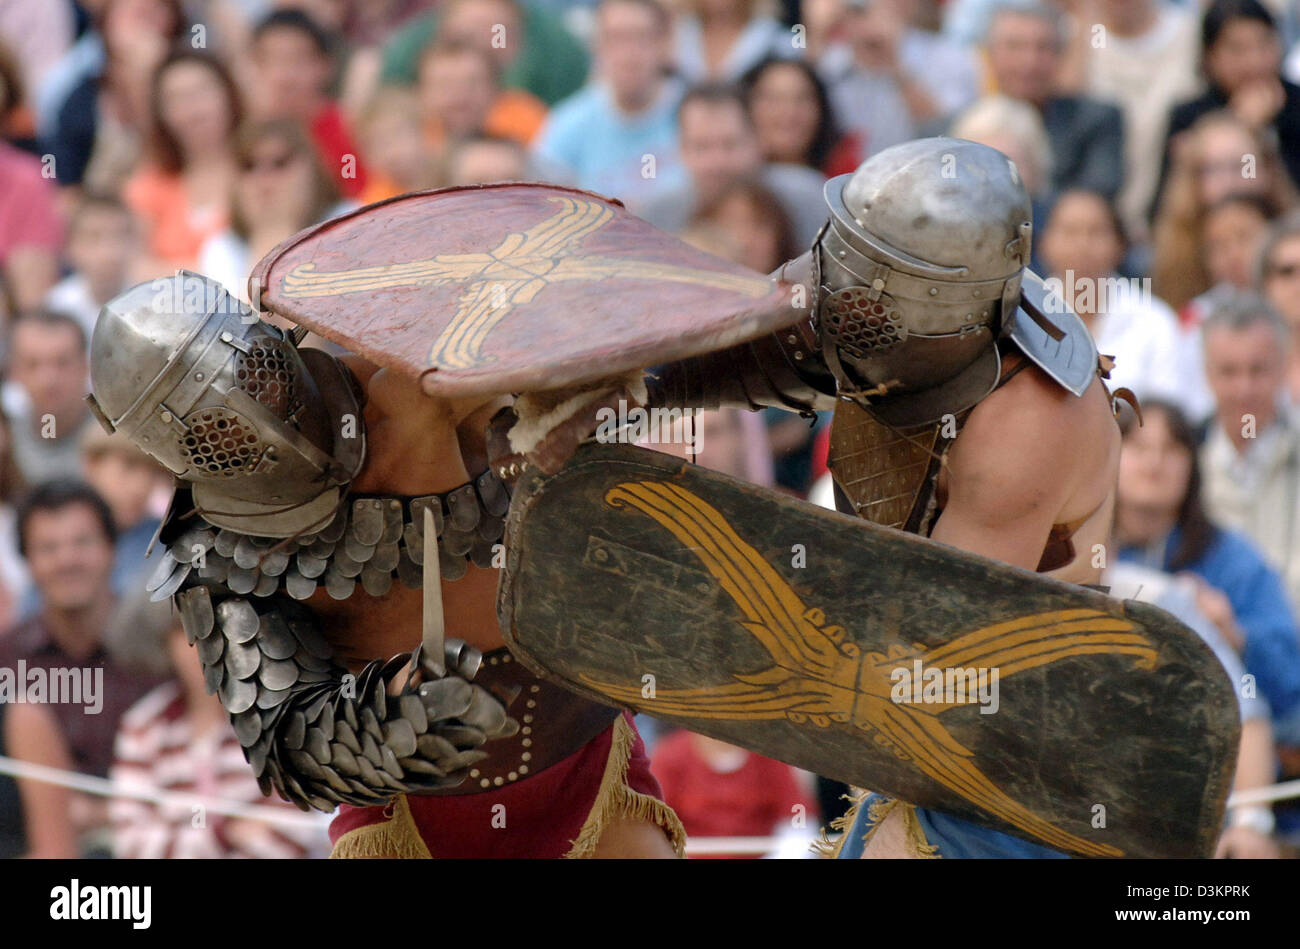 (dpa) - Two actors, dressed as gladiators, stage a fight at the amphitheatre in Trier, Germany, 13 August 2005. At the Roman spectacle 'bread and games' visitors relive what life was like in Roman times. Trier, then named Augusta Treverorum, was founded by the Romans in the year 16 before Christ. 301 years later, Trier became Roman imperial residence. Photo: Harald Tittel Stock Photo